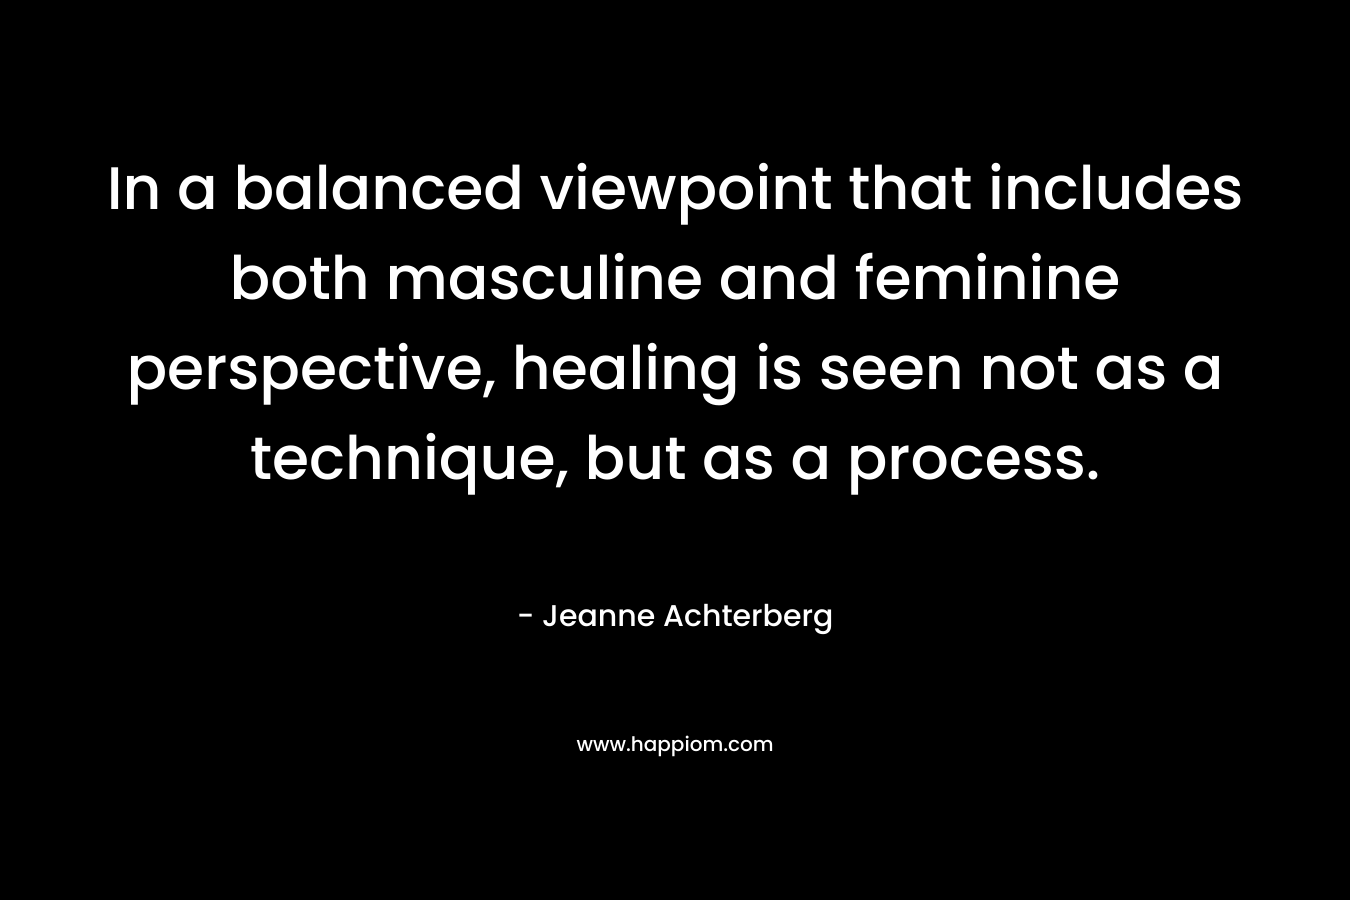 In a balanced viewpoint that includes both masculine and feminine perspective, healing is seen not as a technique, but as a process. – Jeanne Achterberg